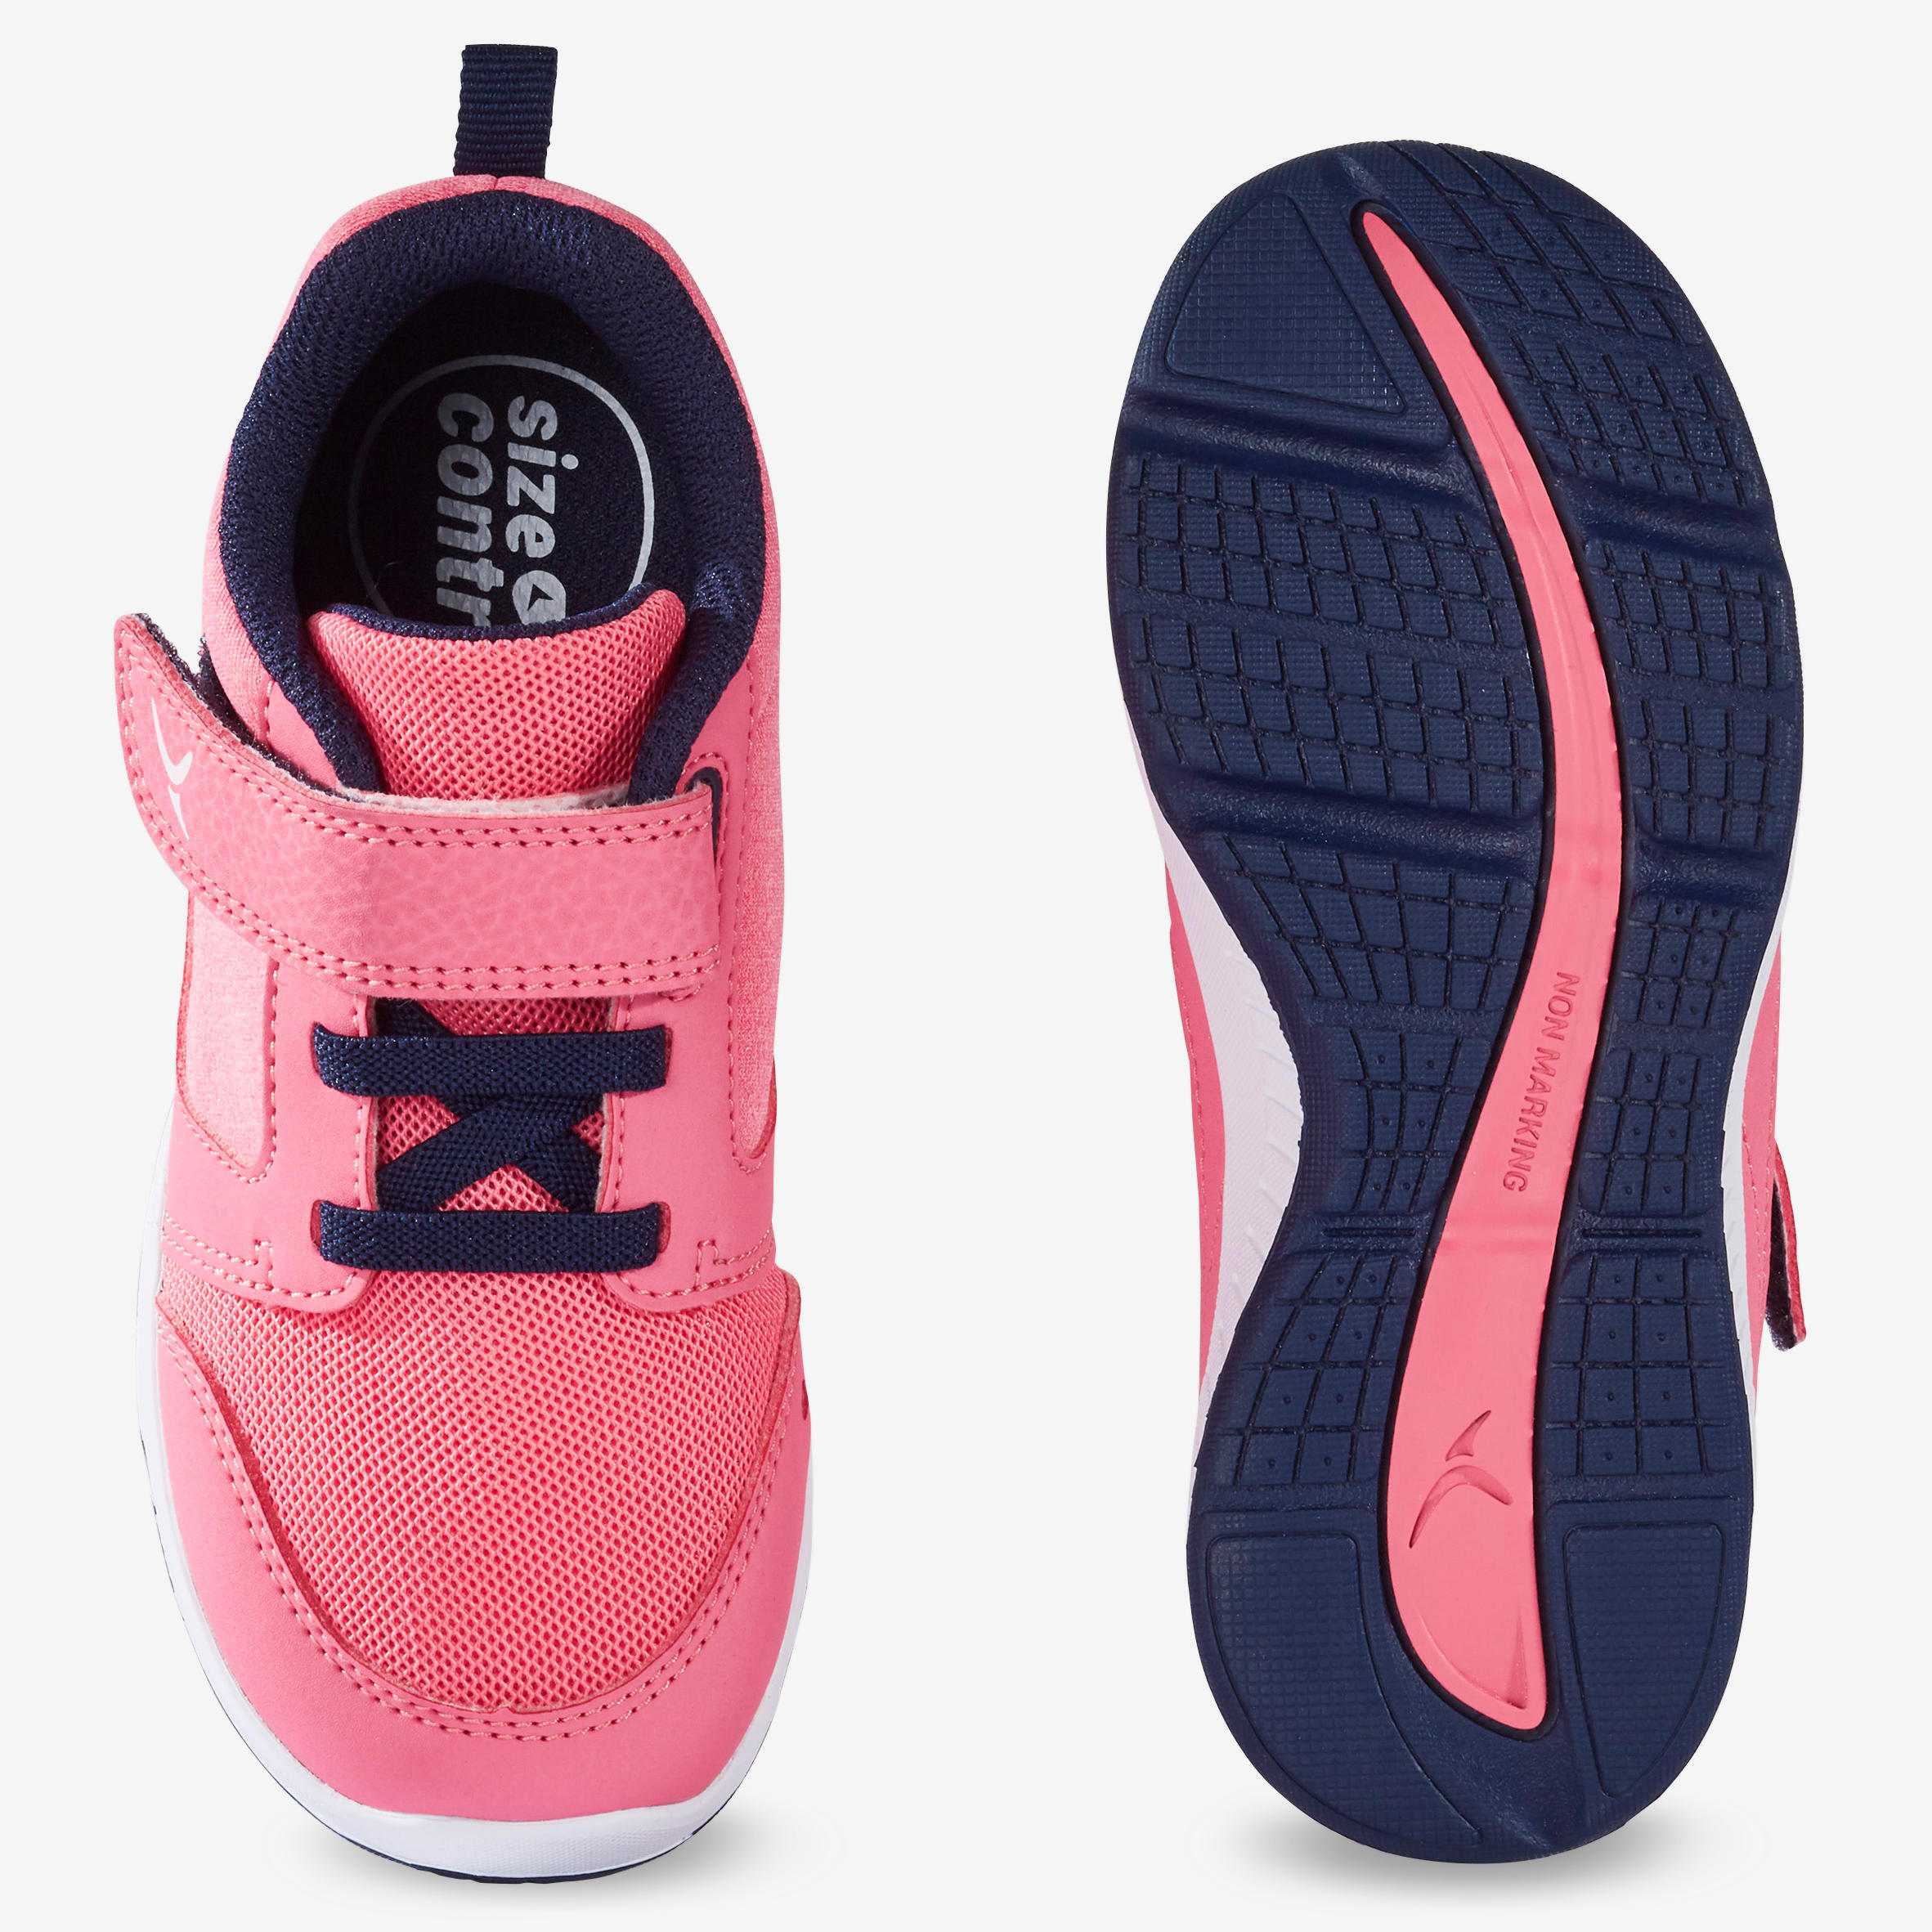 Kids' Comfortable and Breathable Shoes 4/8